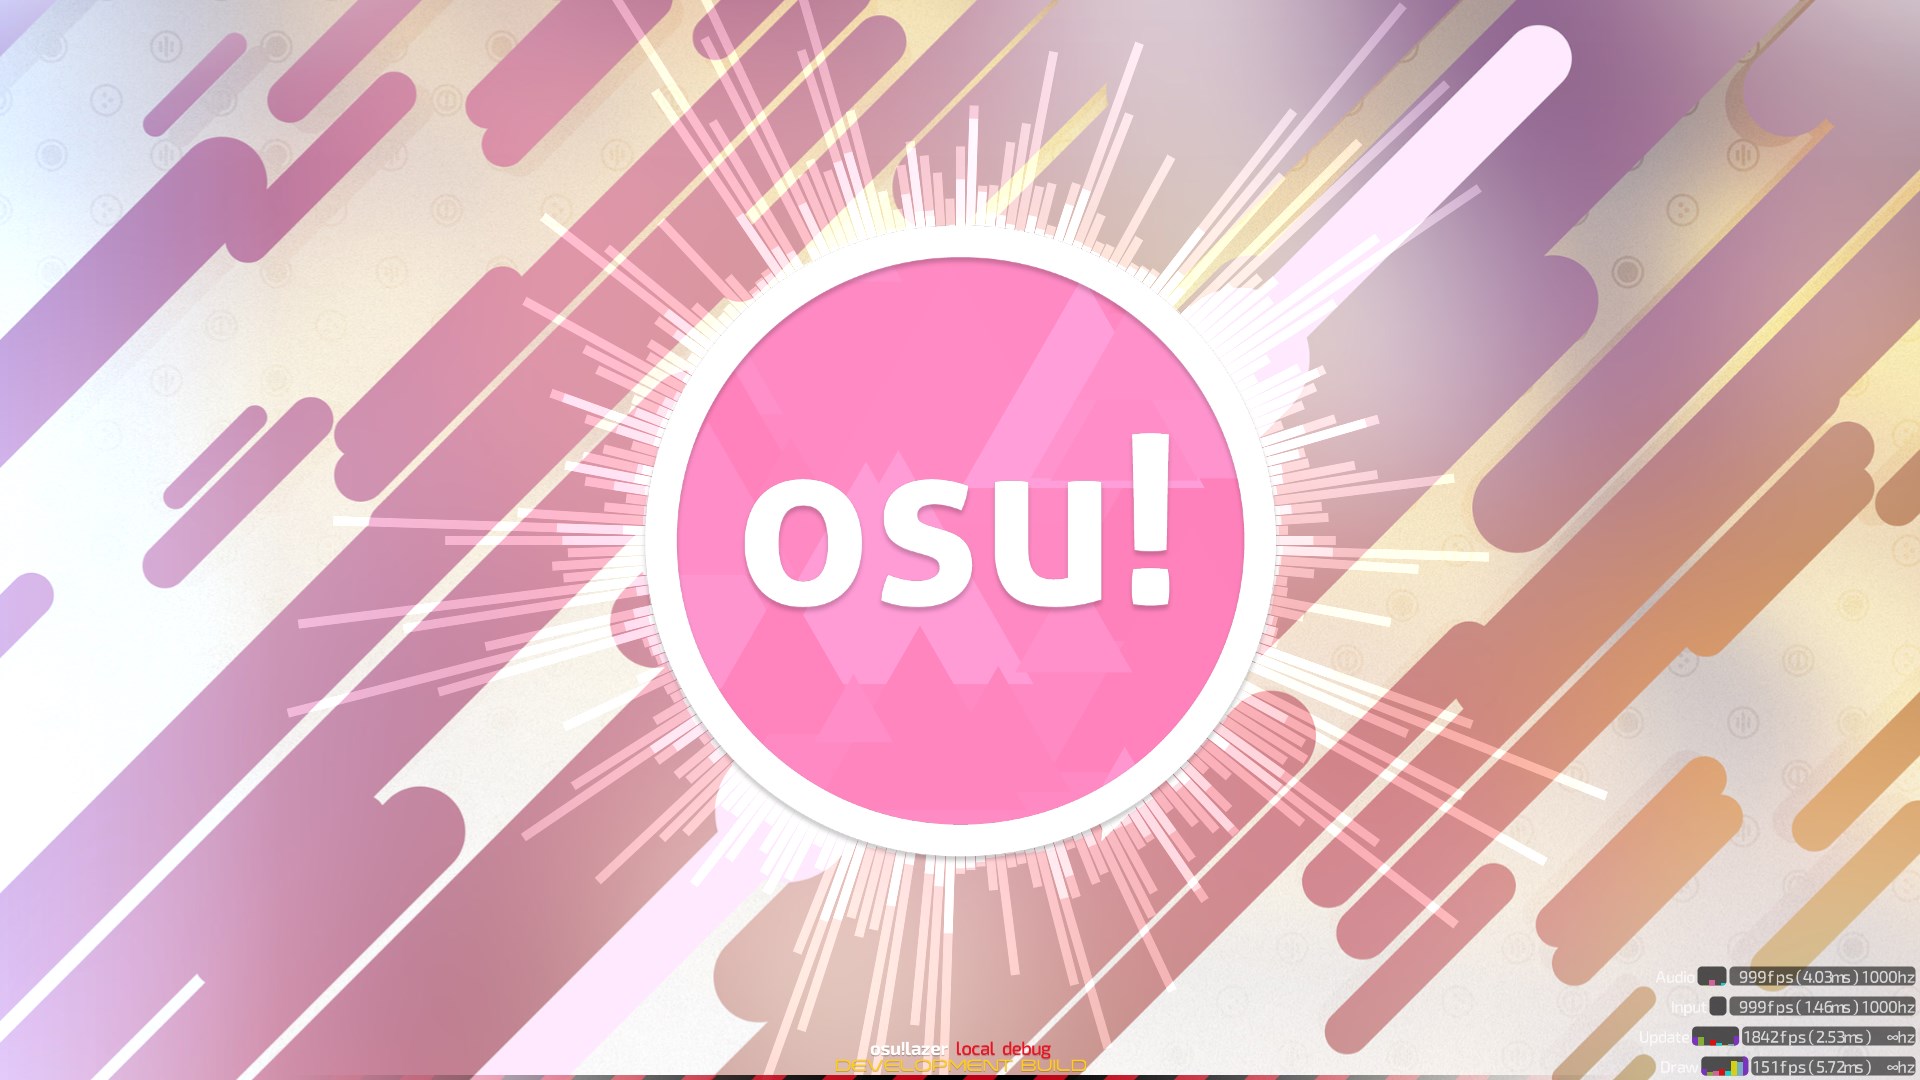 Main Menu Background Cuts Off At Top Edge Issue Ppy Osu